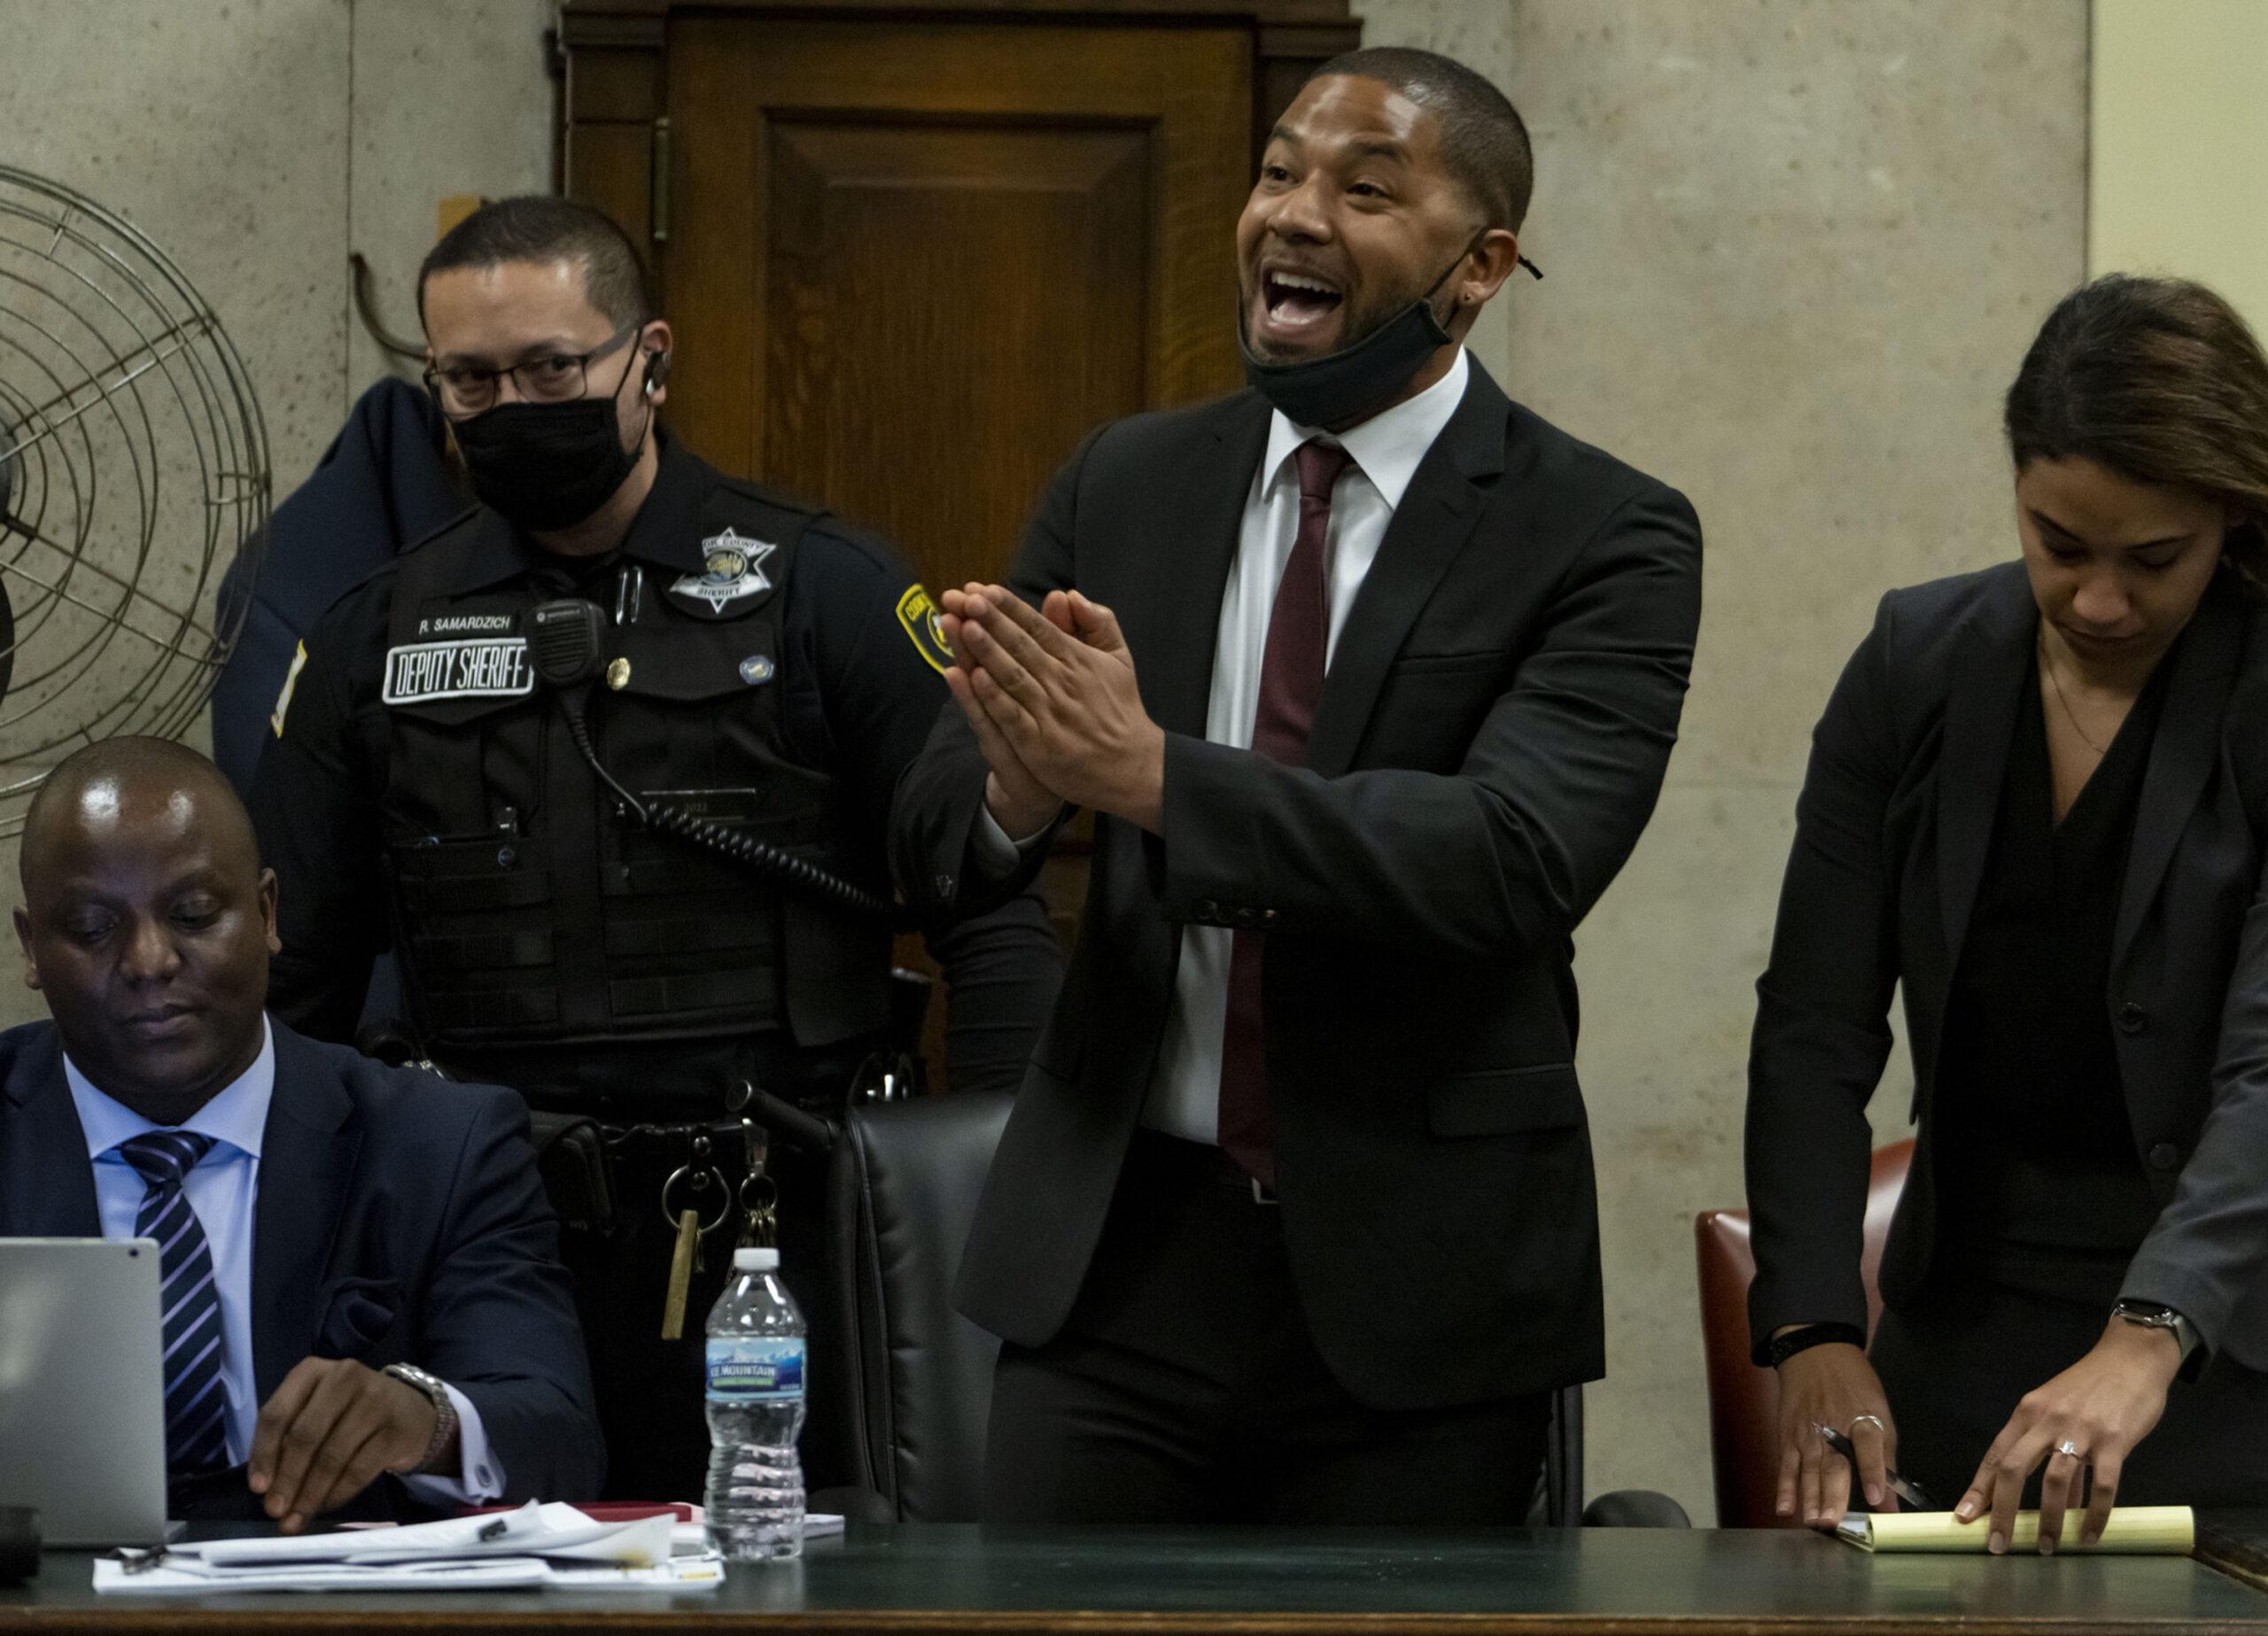 Actor Jussie Smollett speaks to Judge James Linn after his sentence is read March 10, 2022, at the Leighton Criminal Court Building in Chicago.